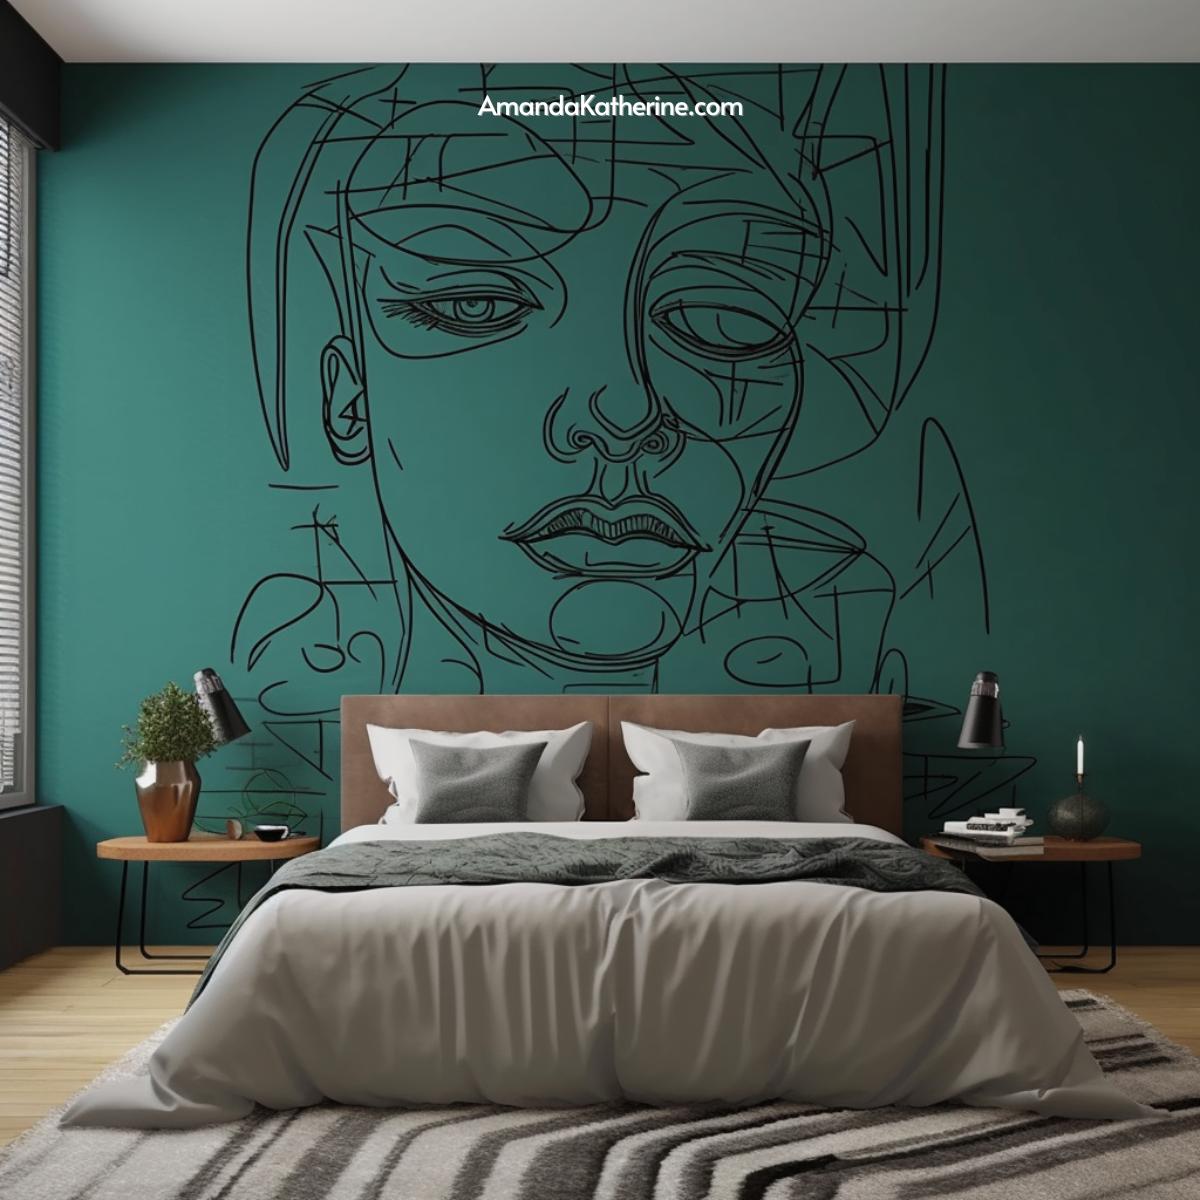 green accent wall ideas | teal green accent wall bedroom